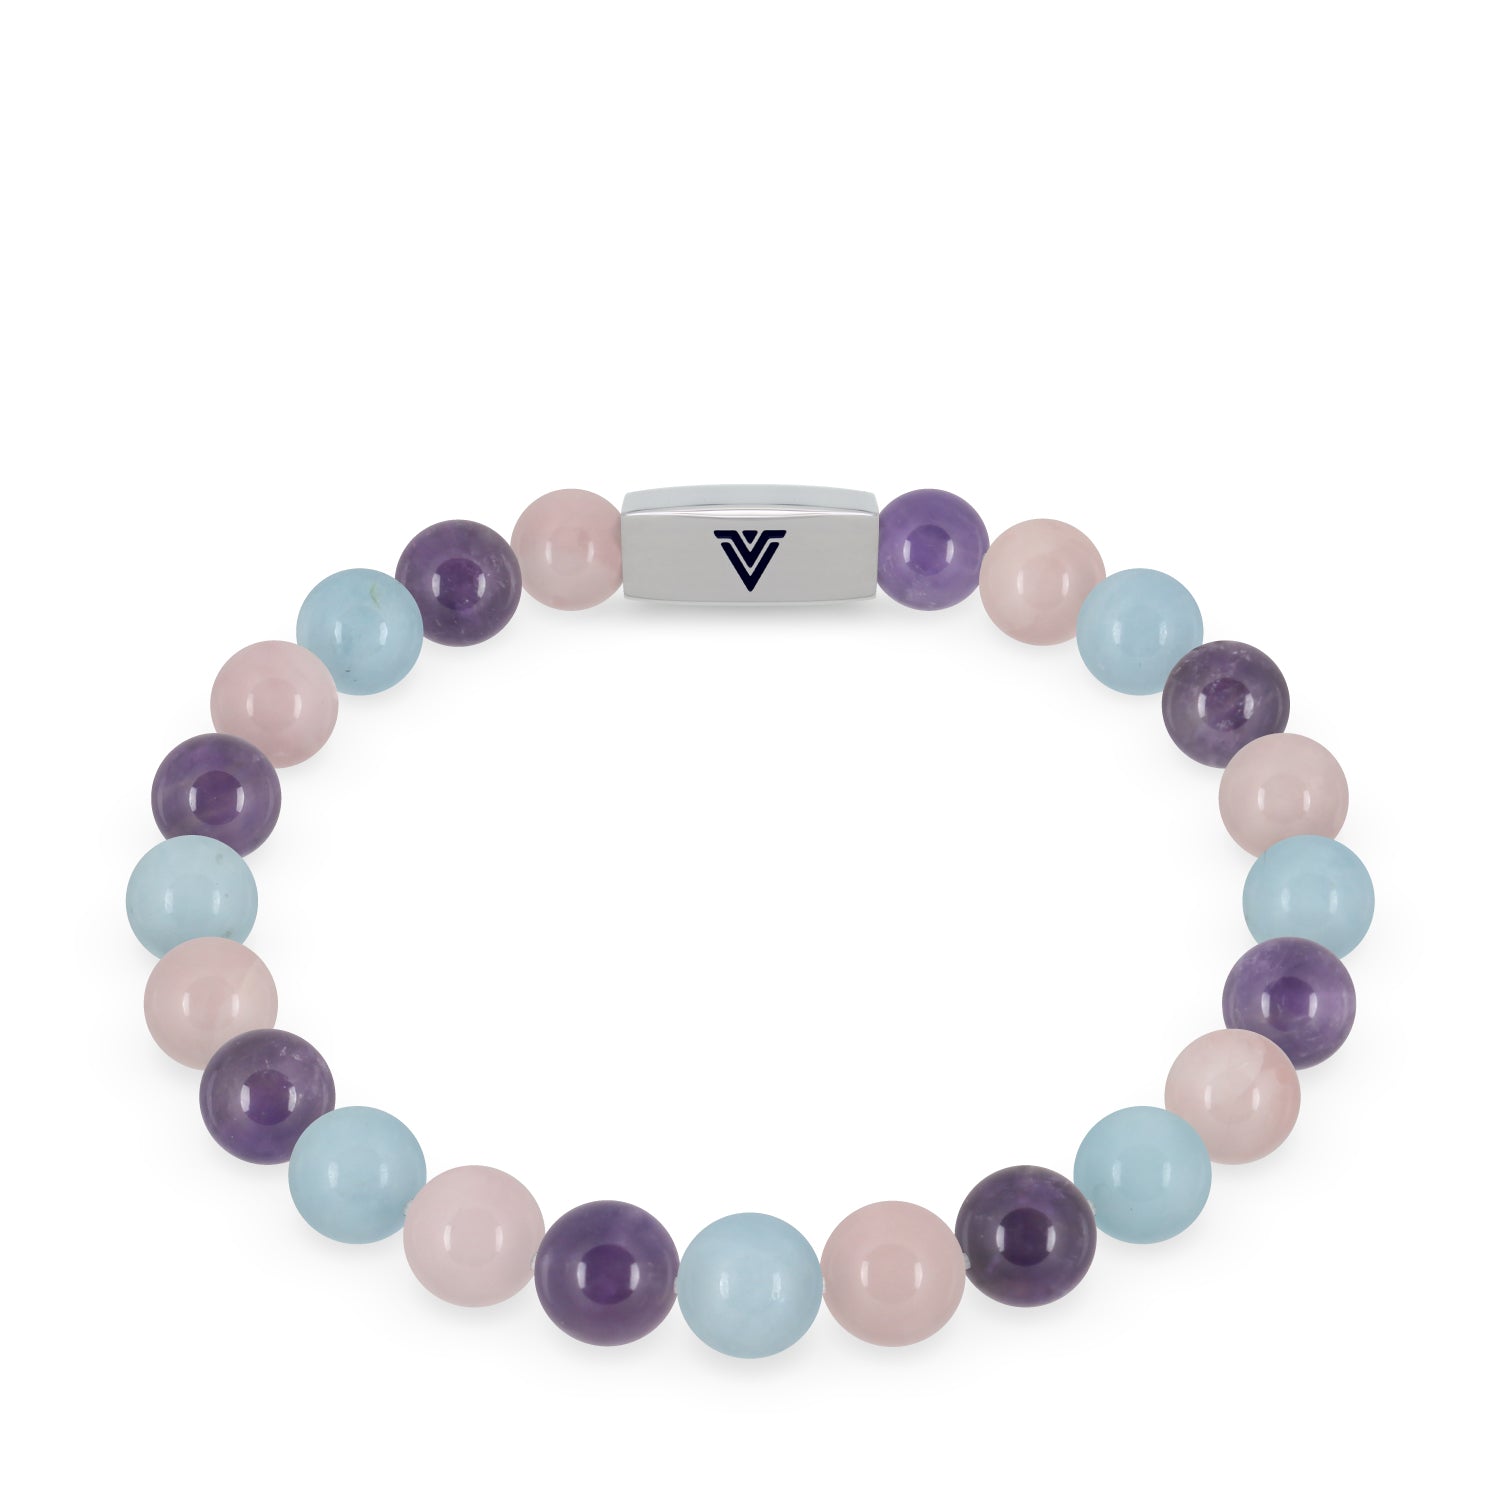 Front view of an 8mm Serenity beaded stretch bracelet featuring Rose Quartz, Amethyst, & Aquamarine crystal and silver stainless steel logo bead made by Voltlin